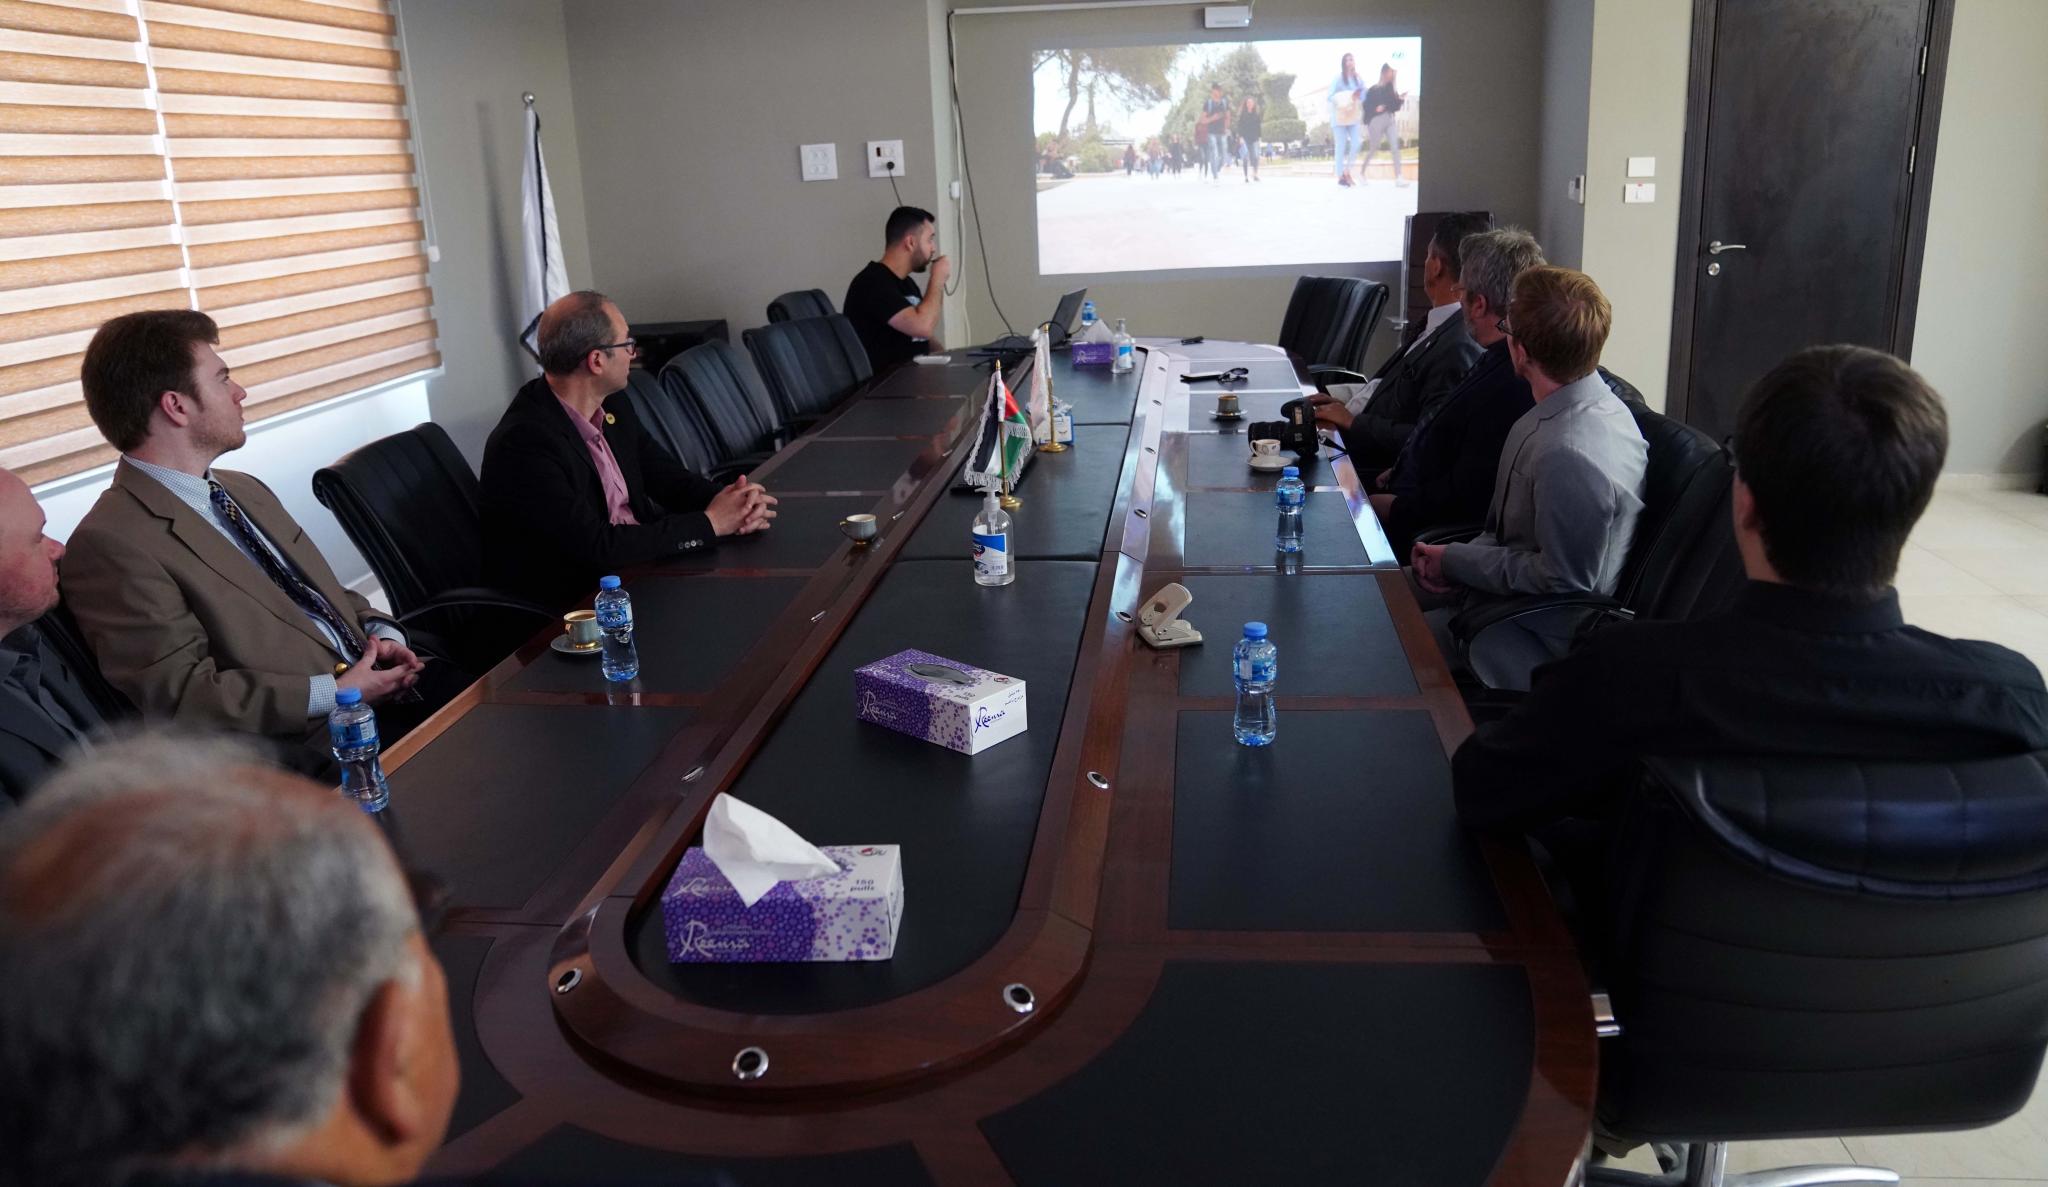 The University President Receives an Academic and Student Delegation from Shenandoah University, USA